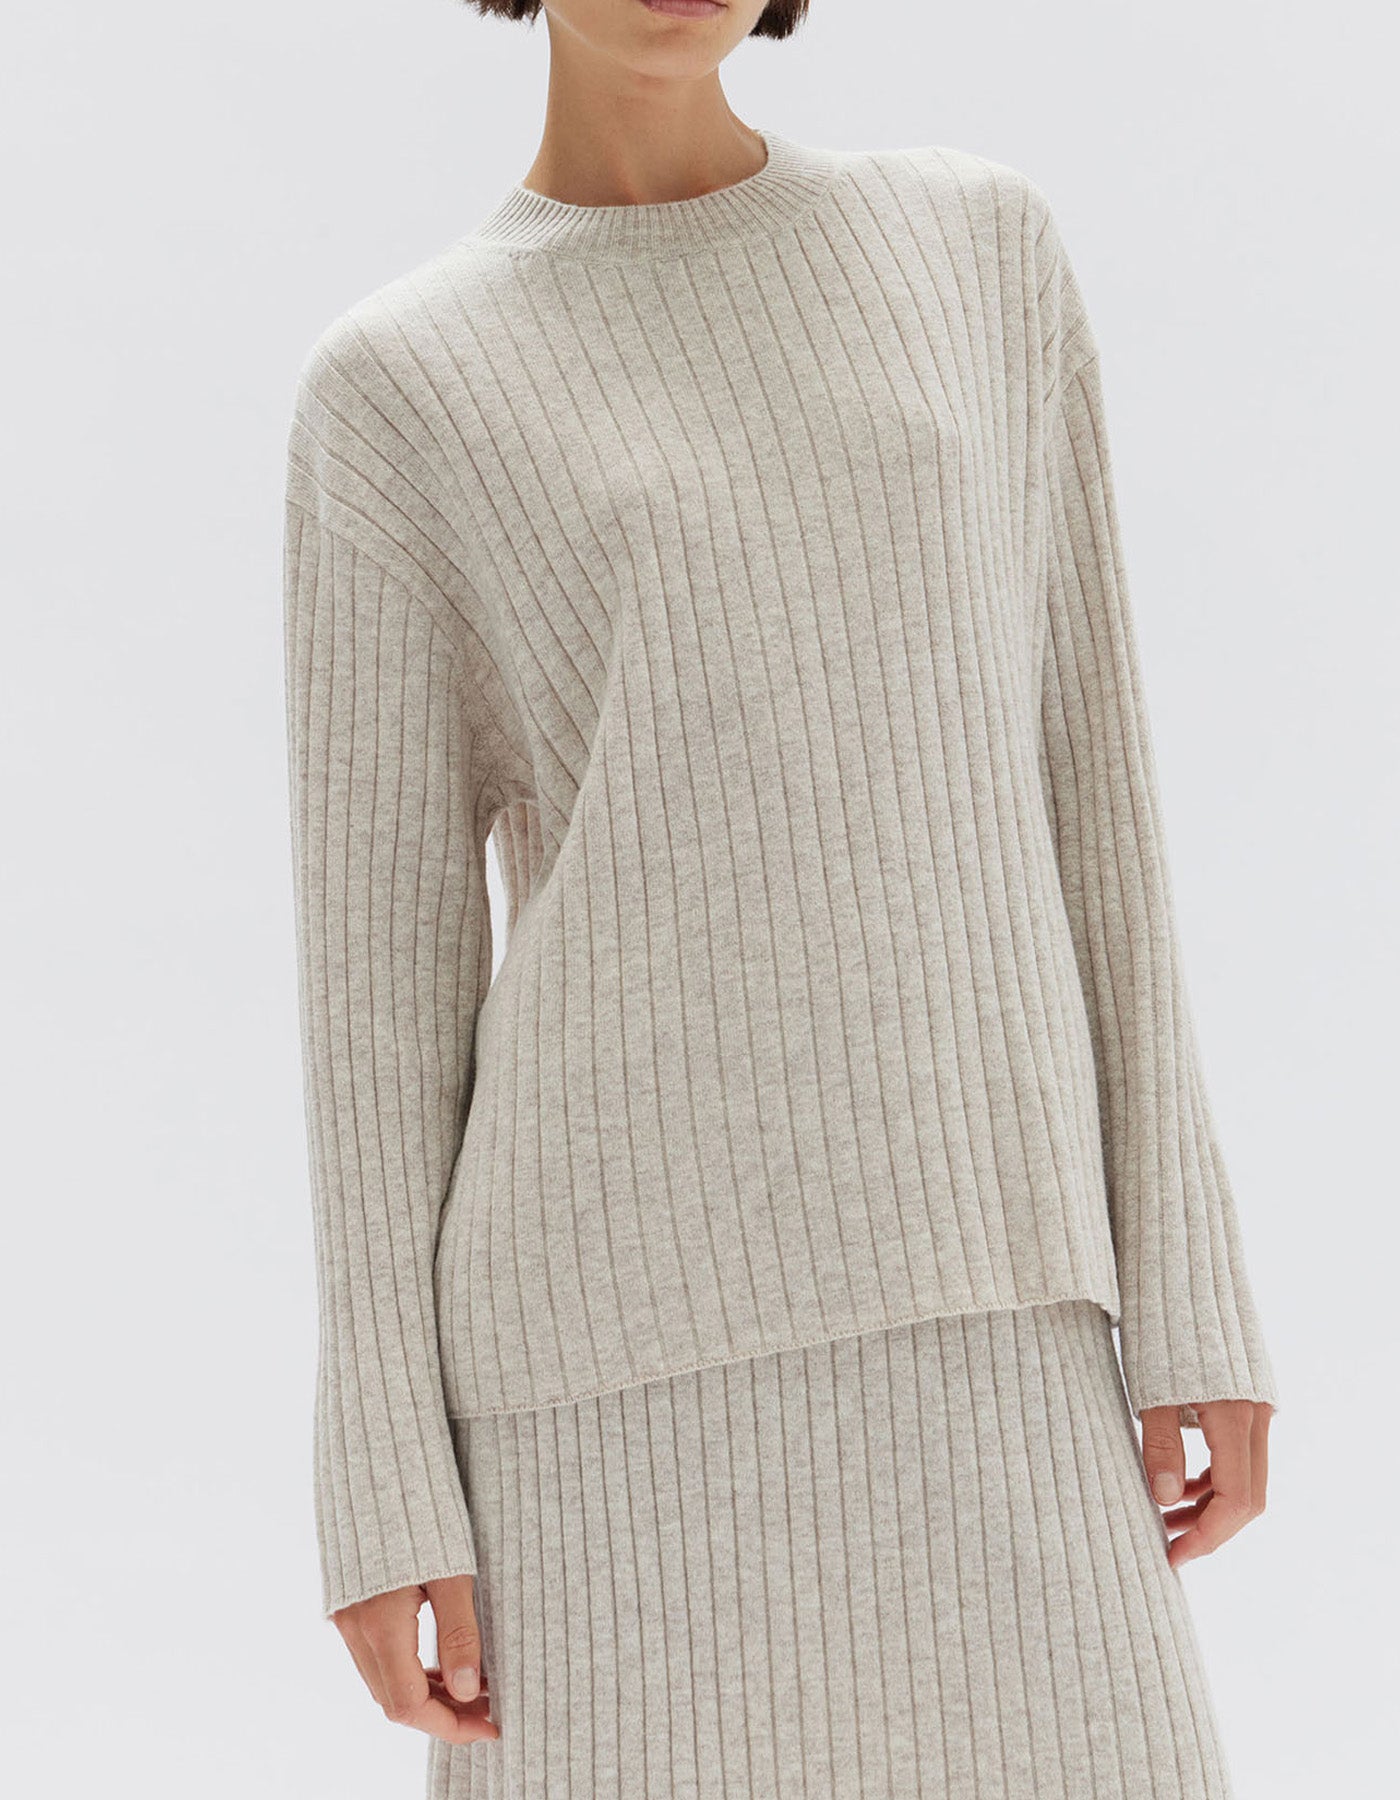 Assembly Label Wool Cashmere Long Sleeve Top Oat Marle